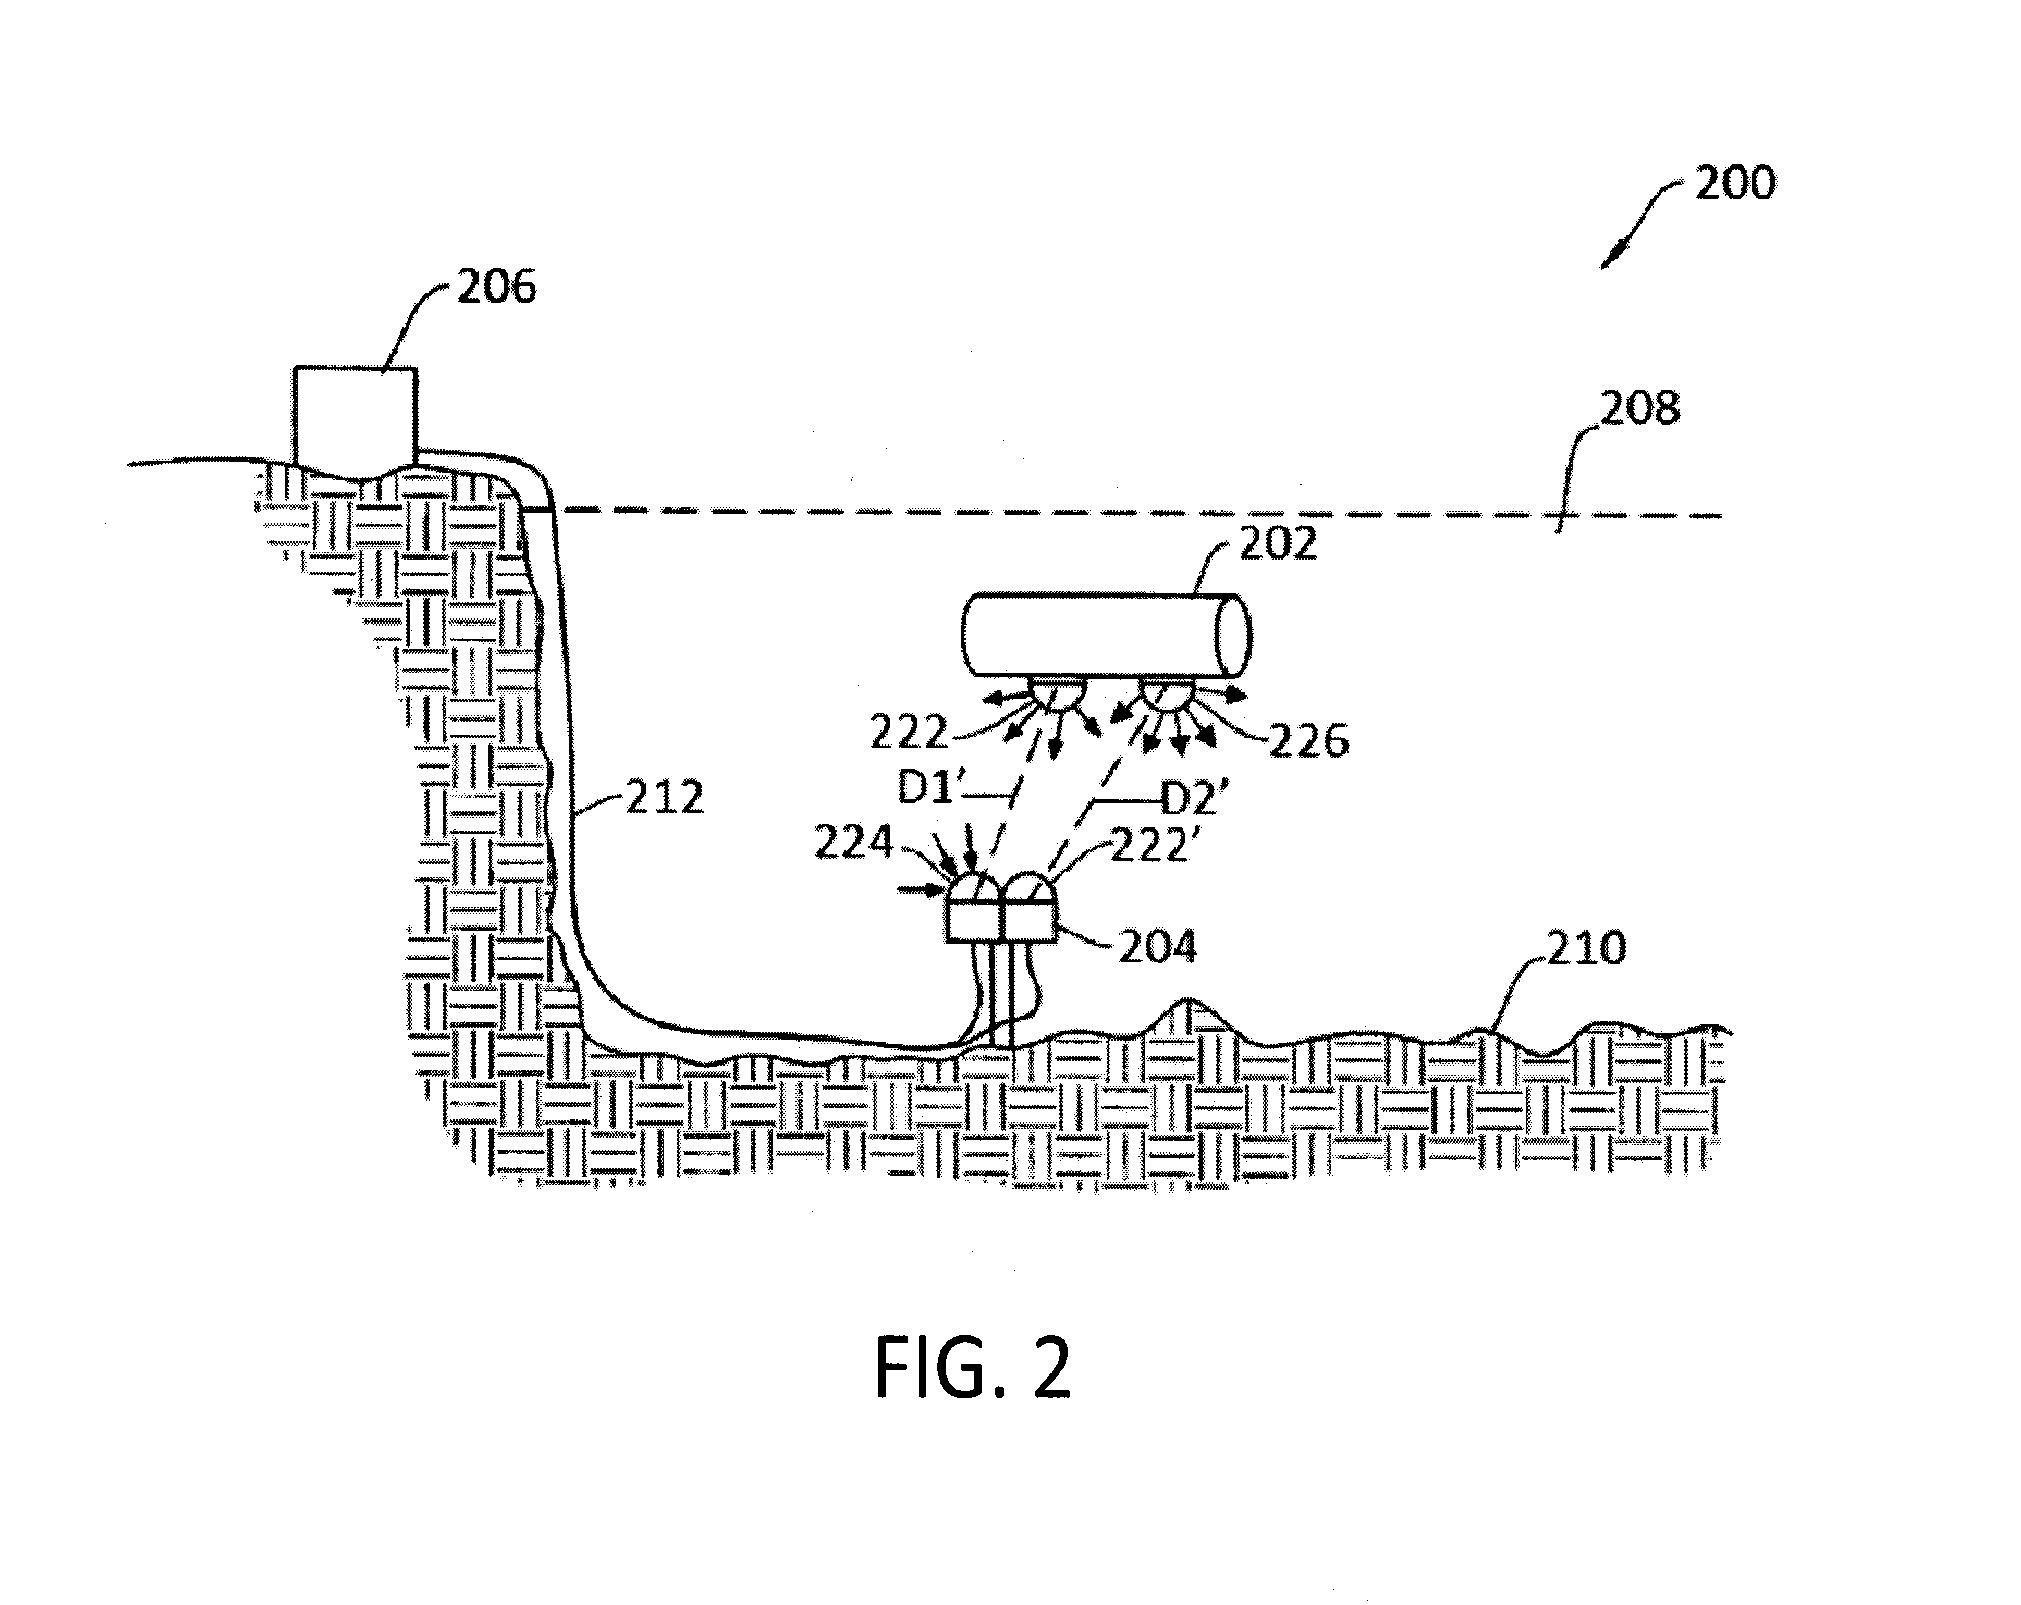 Optical Communication Systems and Methods